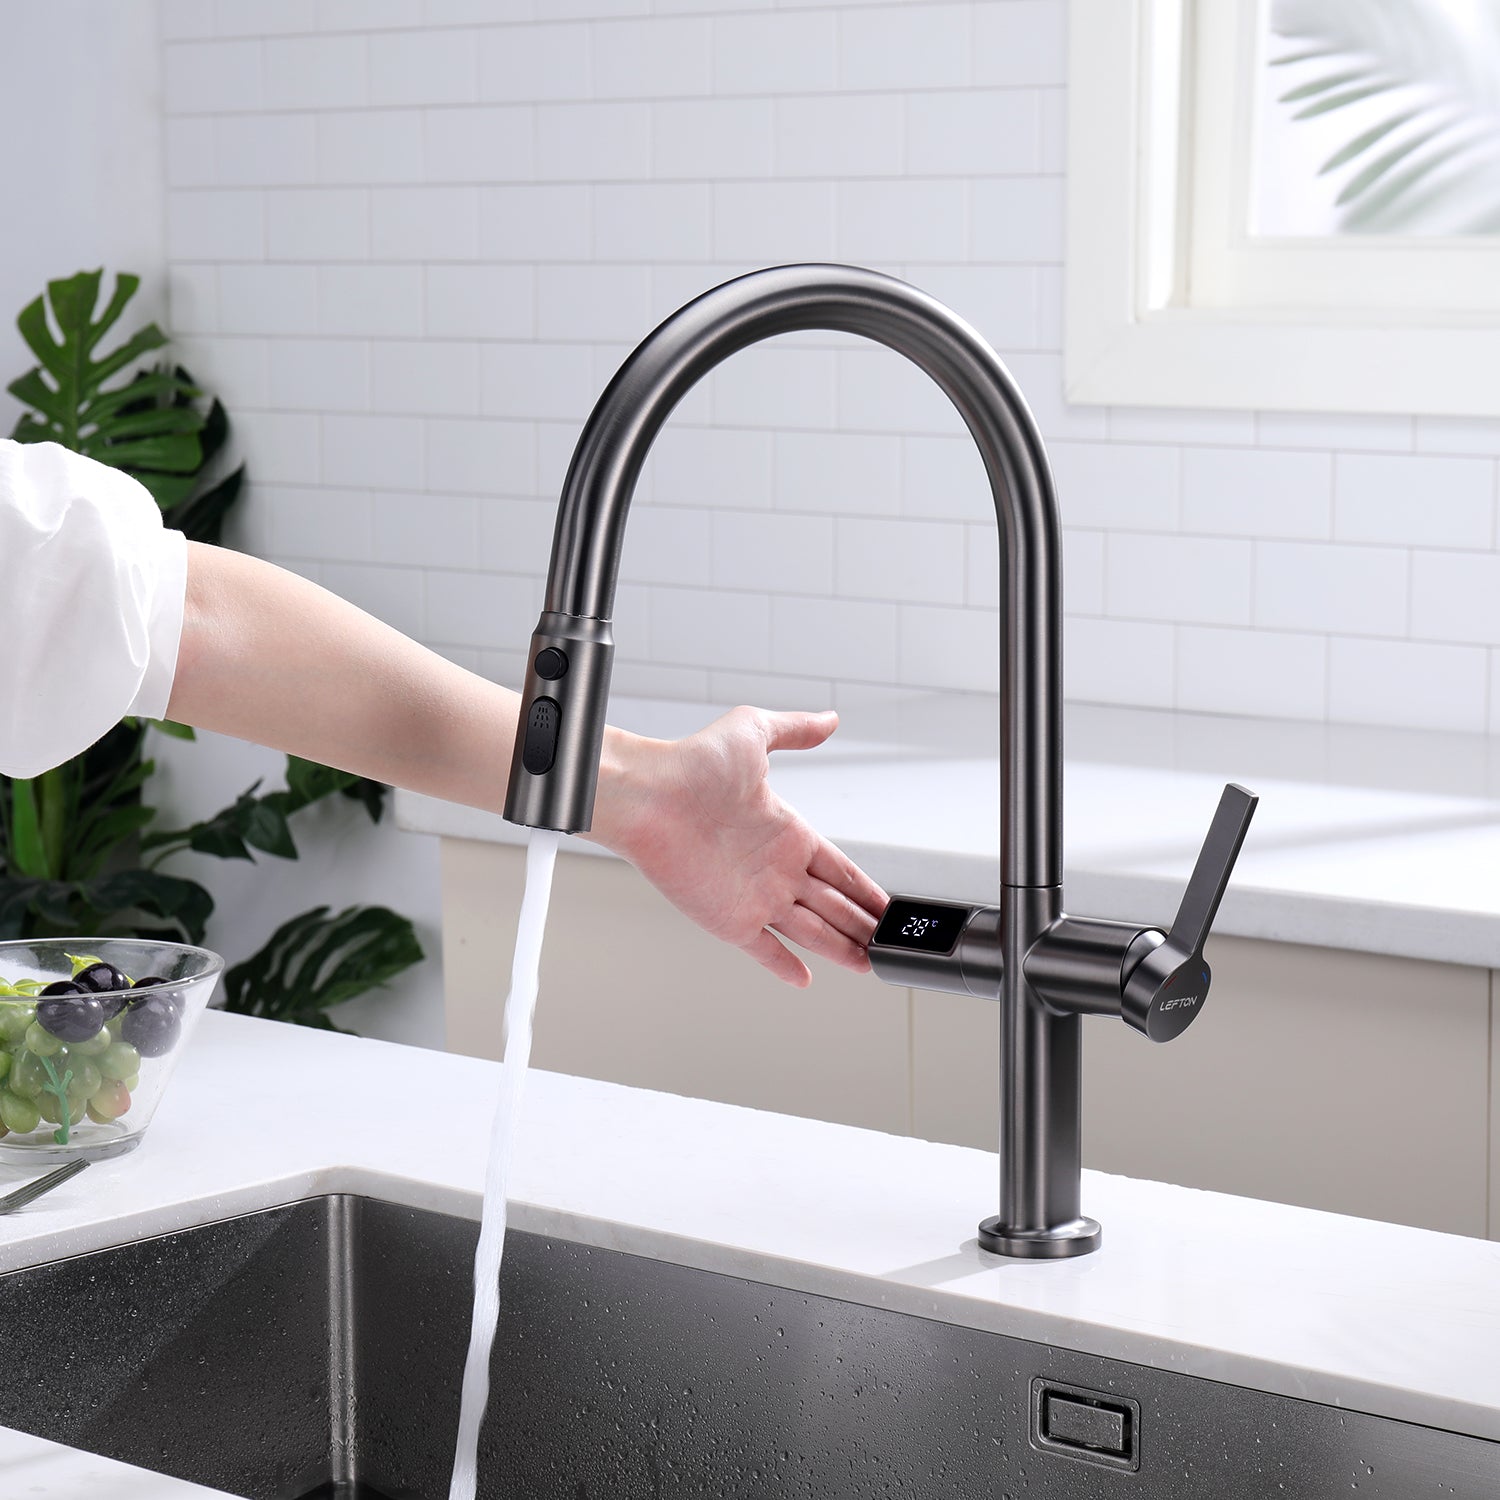 Lefton Modern Stainless Steel Kitchen Faucet with Pull-Down Sprayer-KF2206